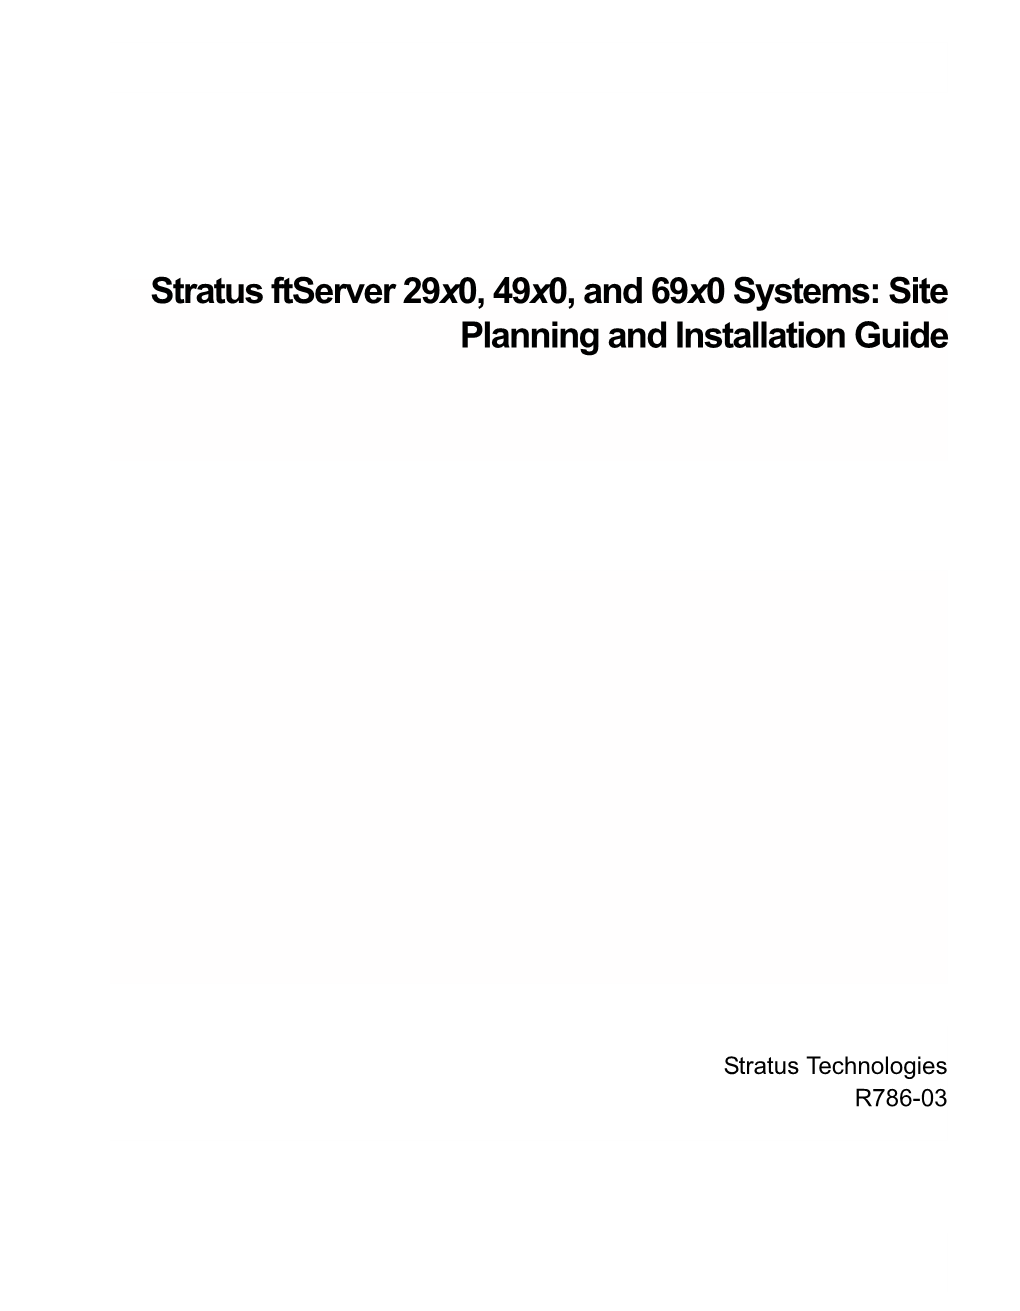 Stratus Ftserver 29X0, 49X0, and 69X0 Systems: Site Planning and Installation Guide